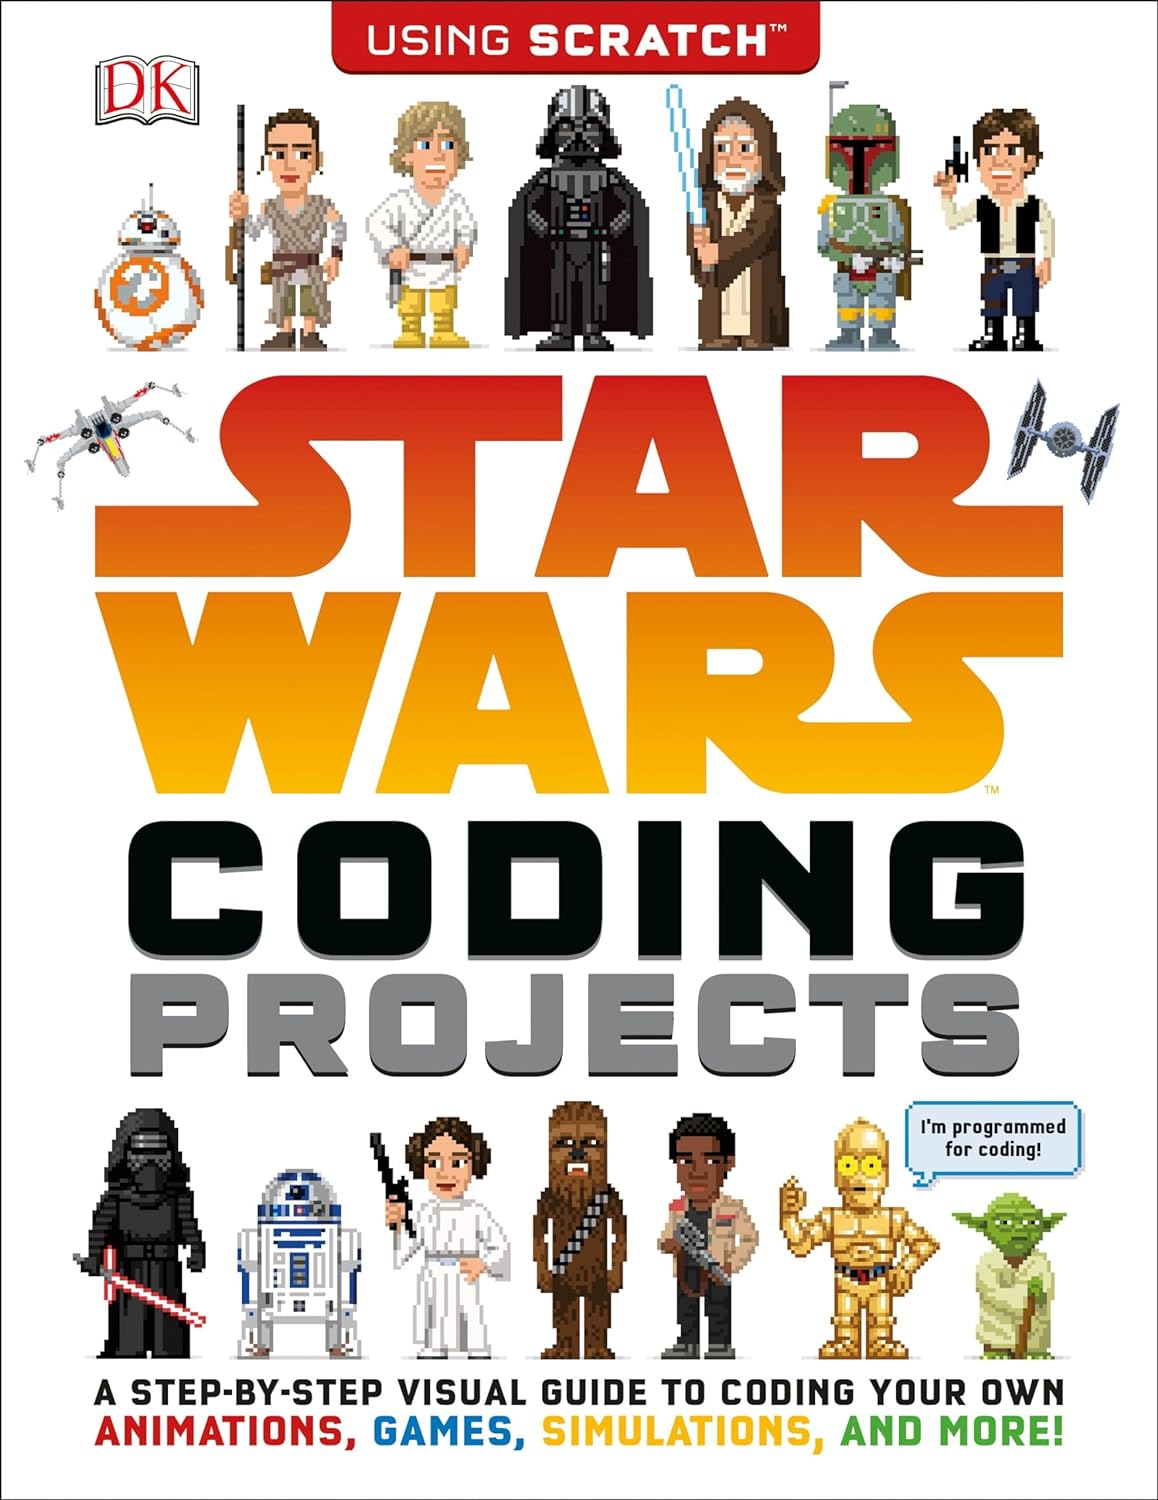 Star Wars Coding Projects: A Step-by-Step Visual Guide to Coding Your Own Animations, Games, Simulations and more!